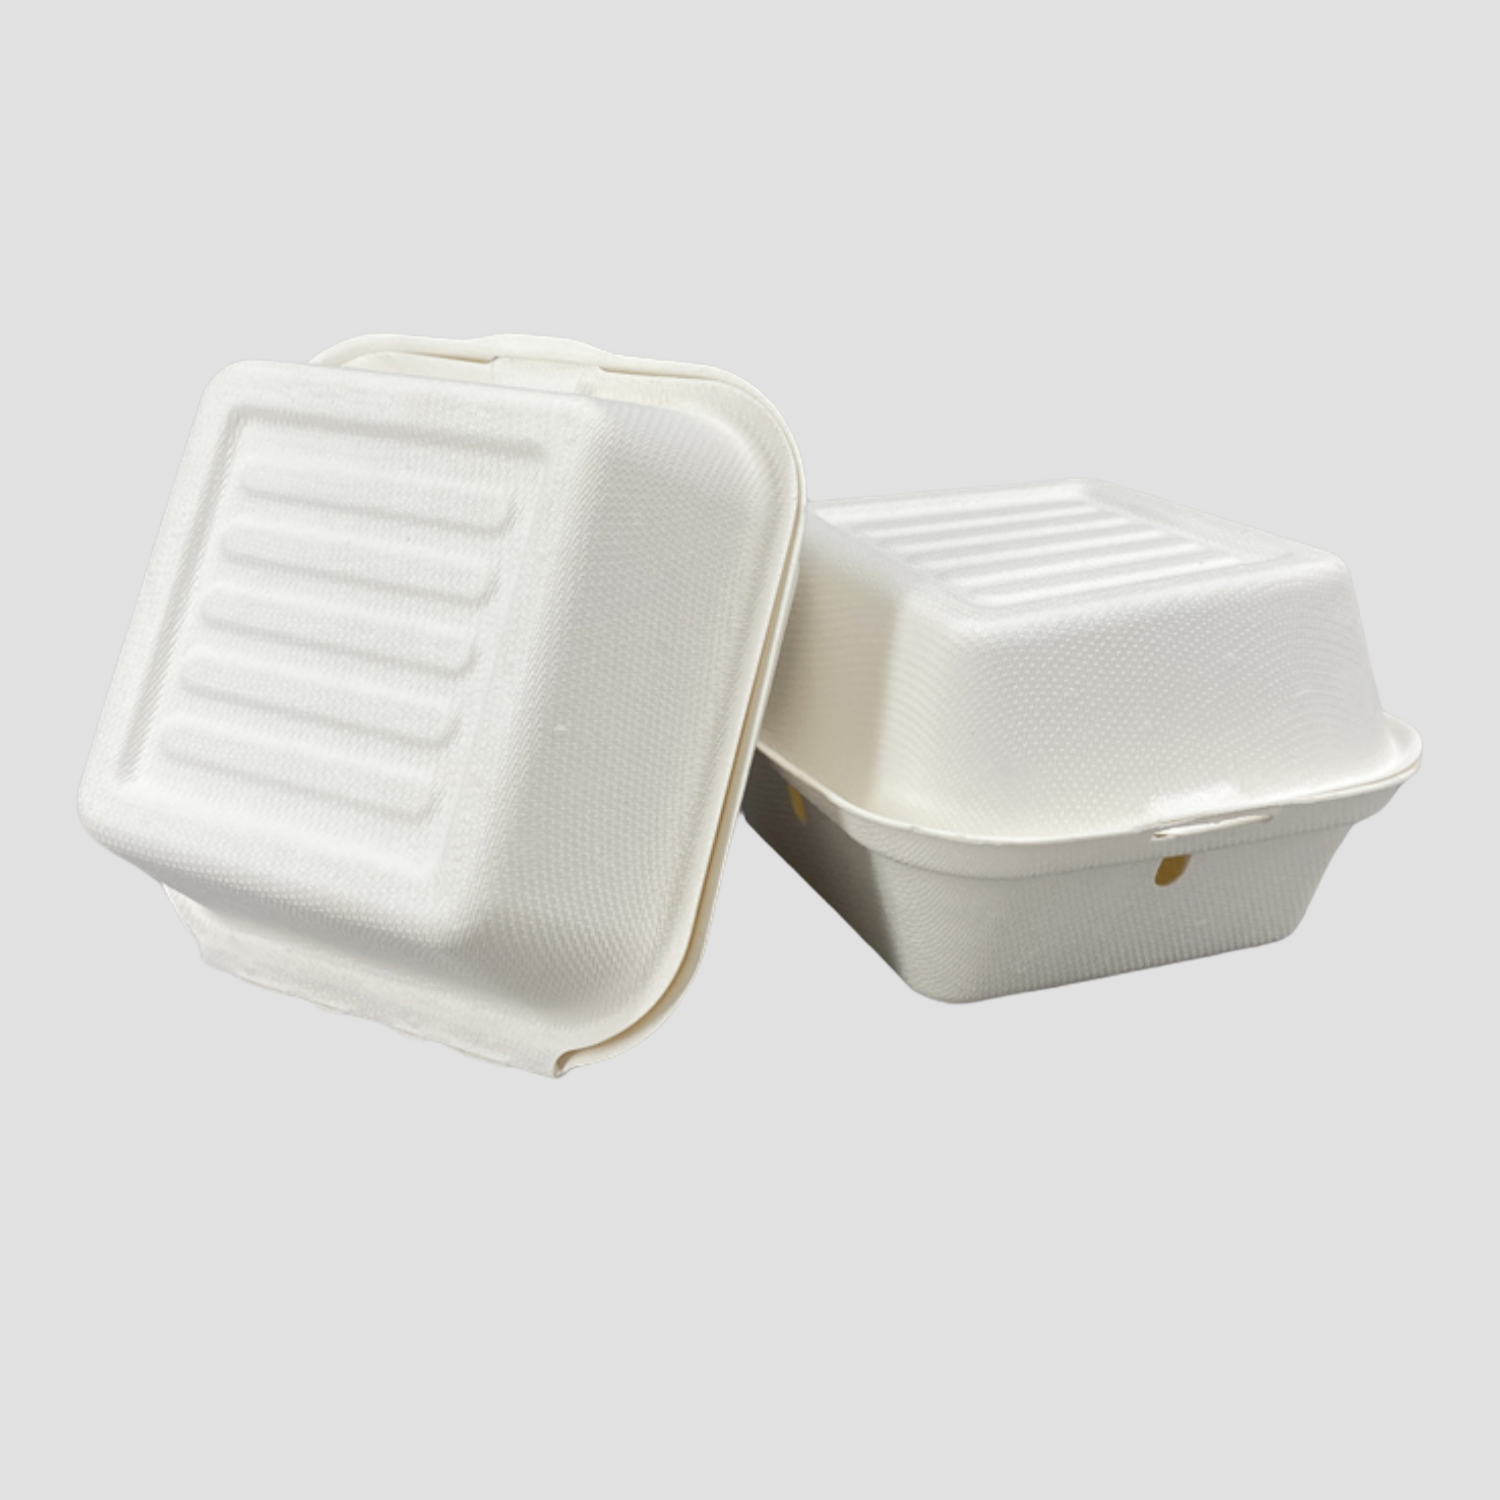 Bagasse plates and trays with PET lids - Directecogreen